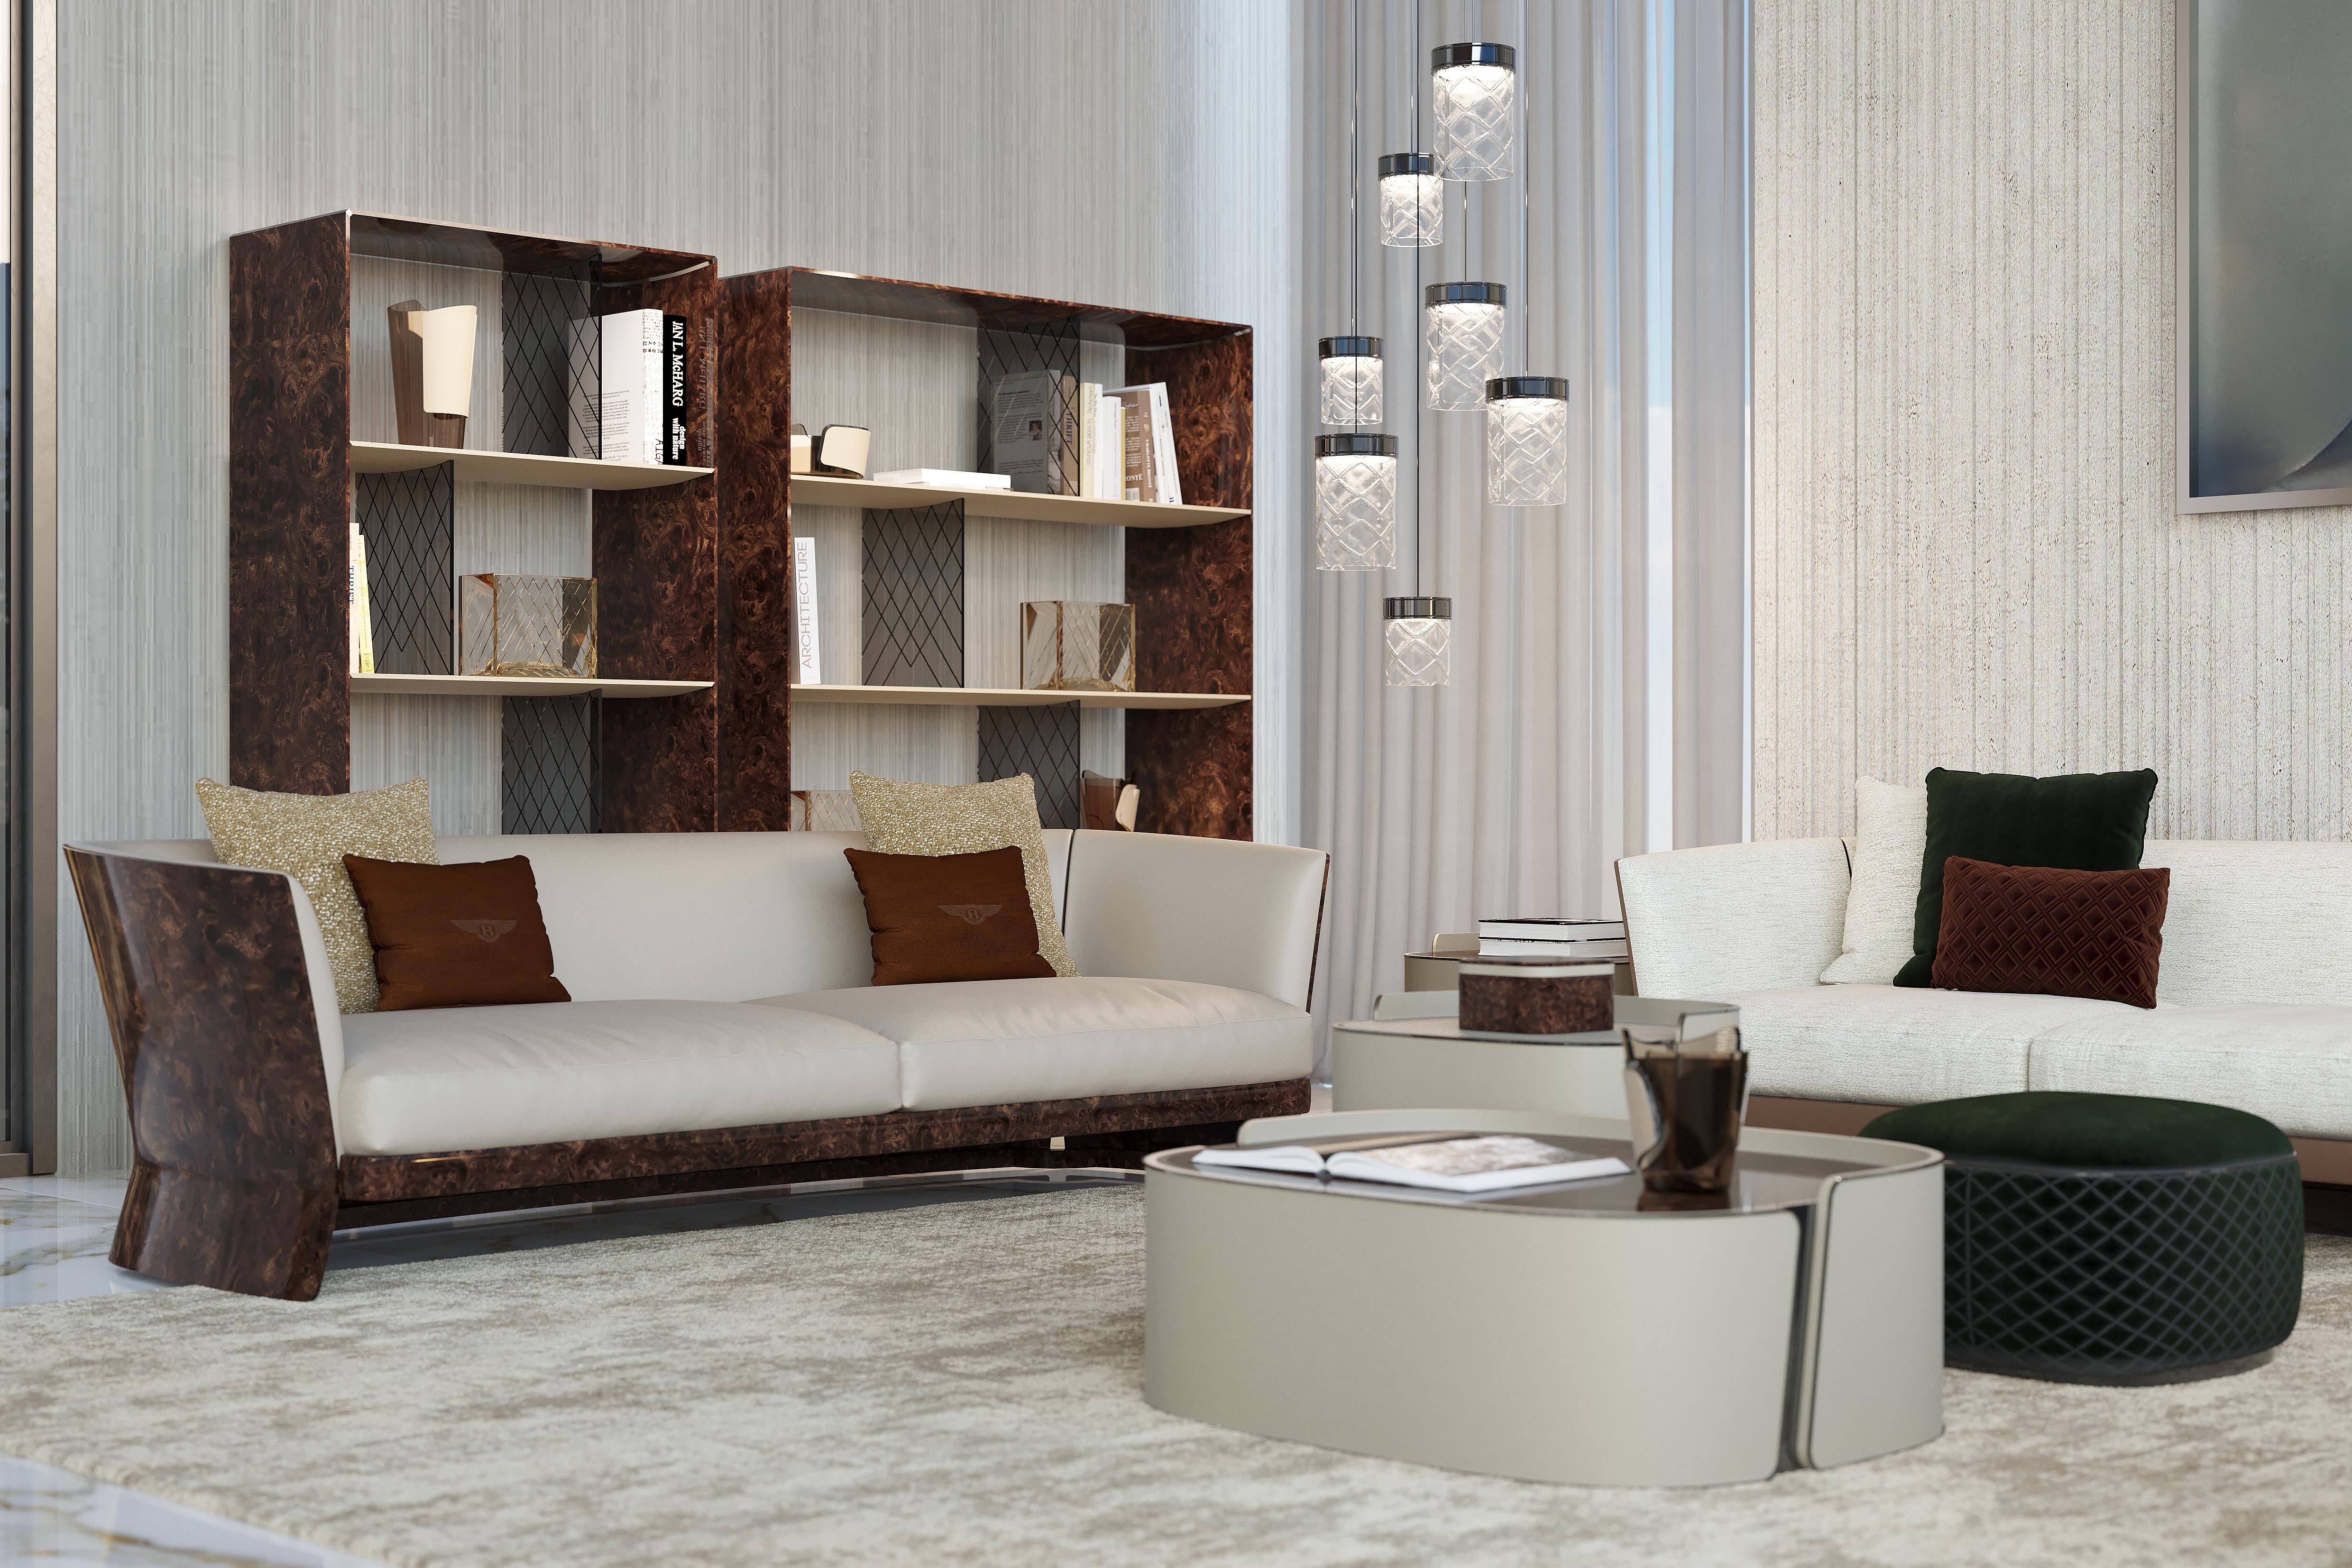 Home Furnishings & Accessories by Luxury Living Group - Galerie